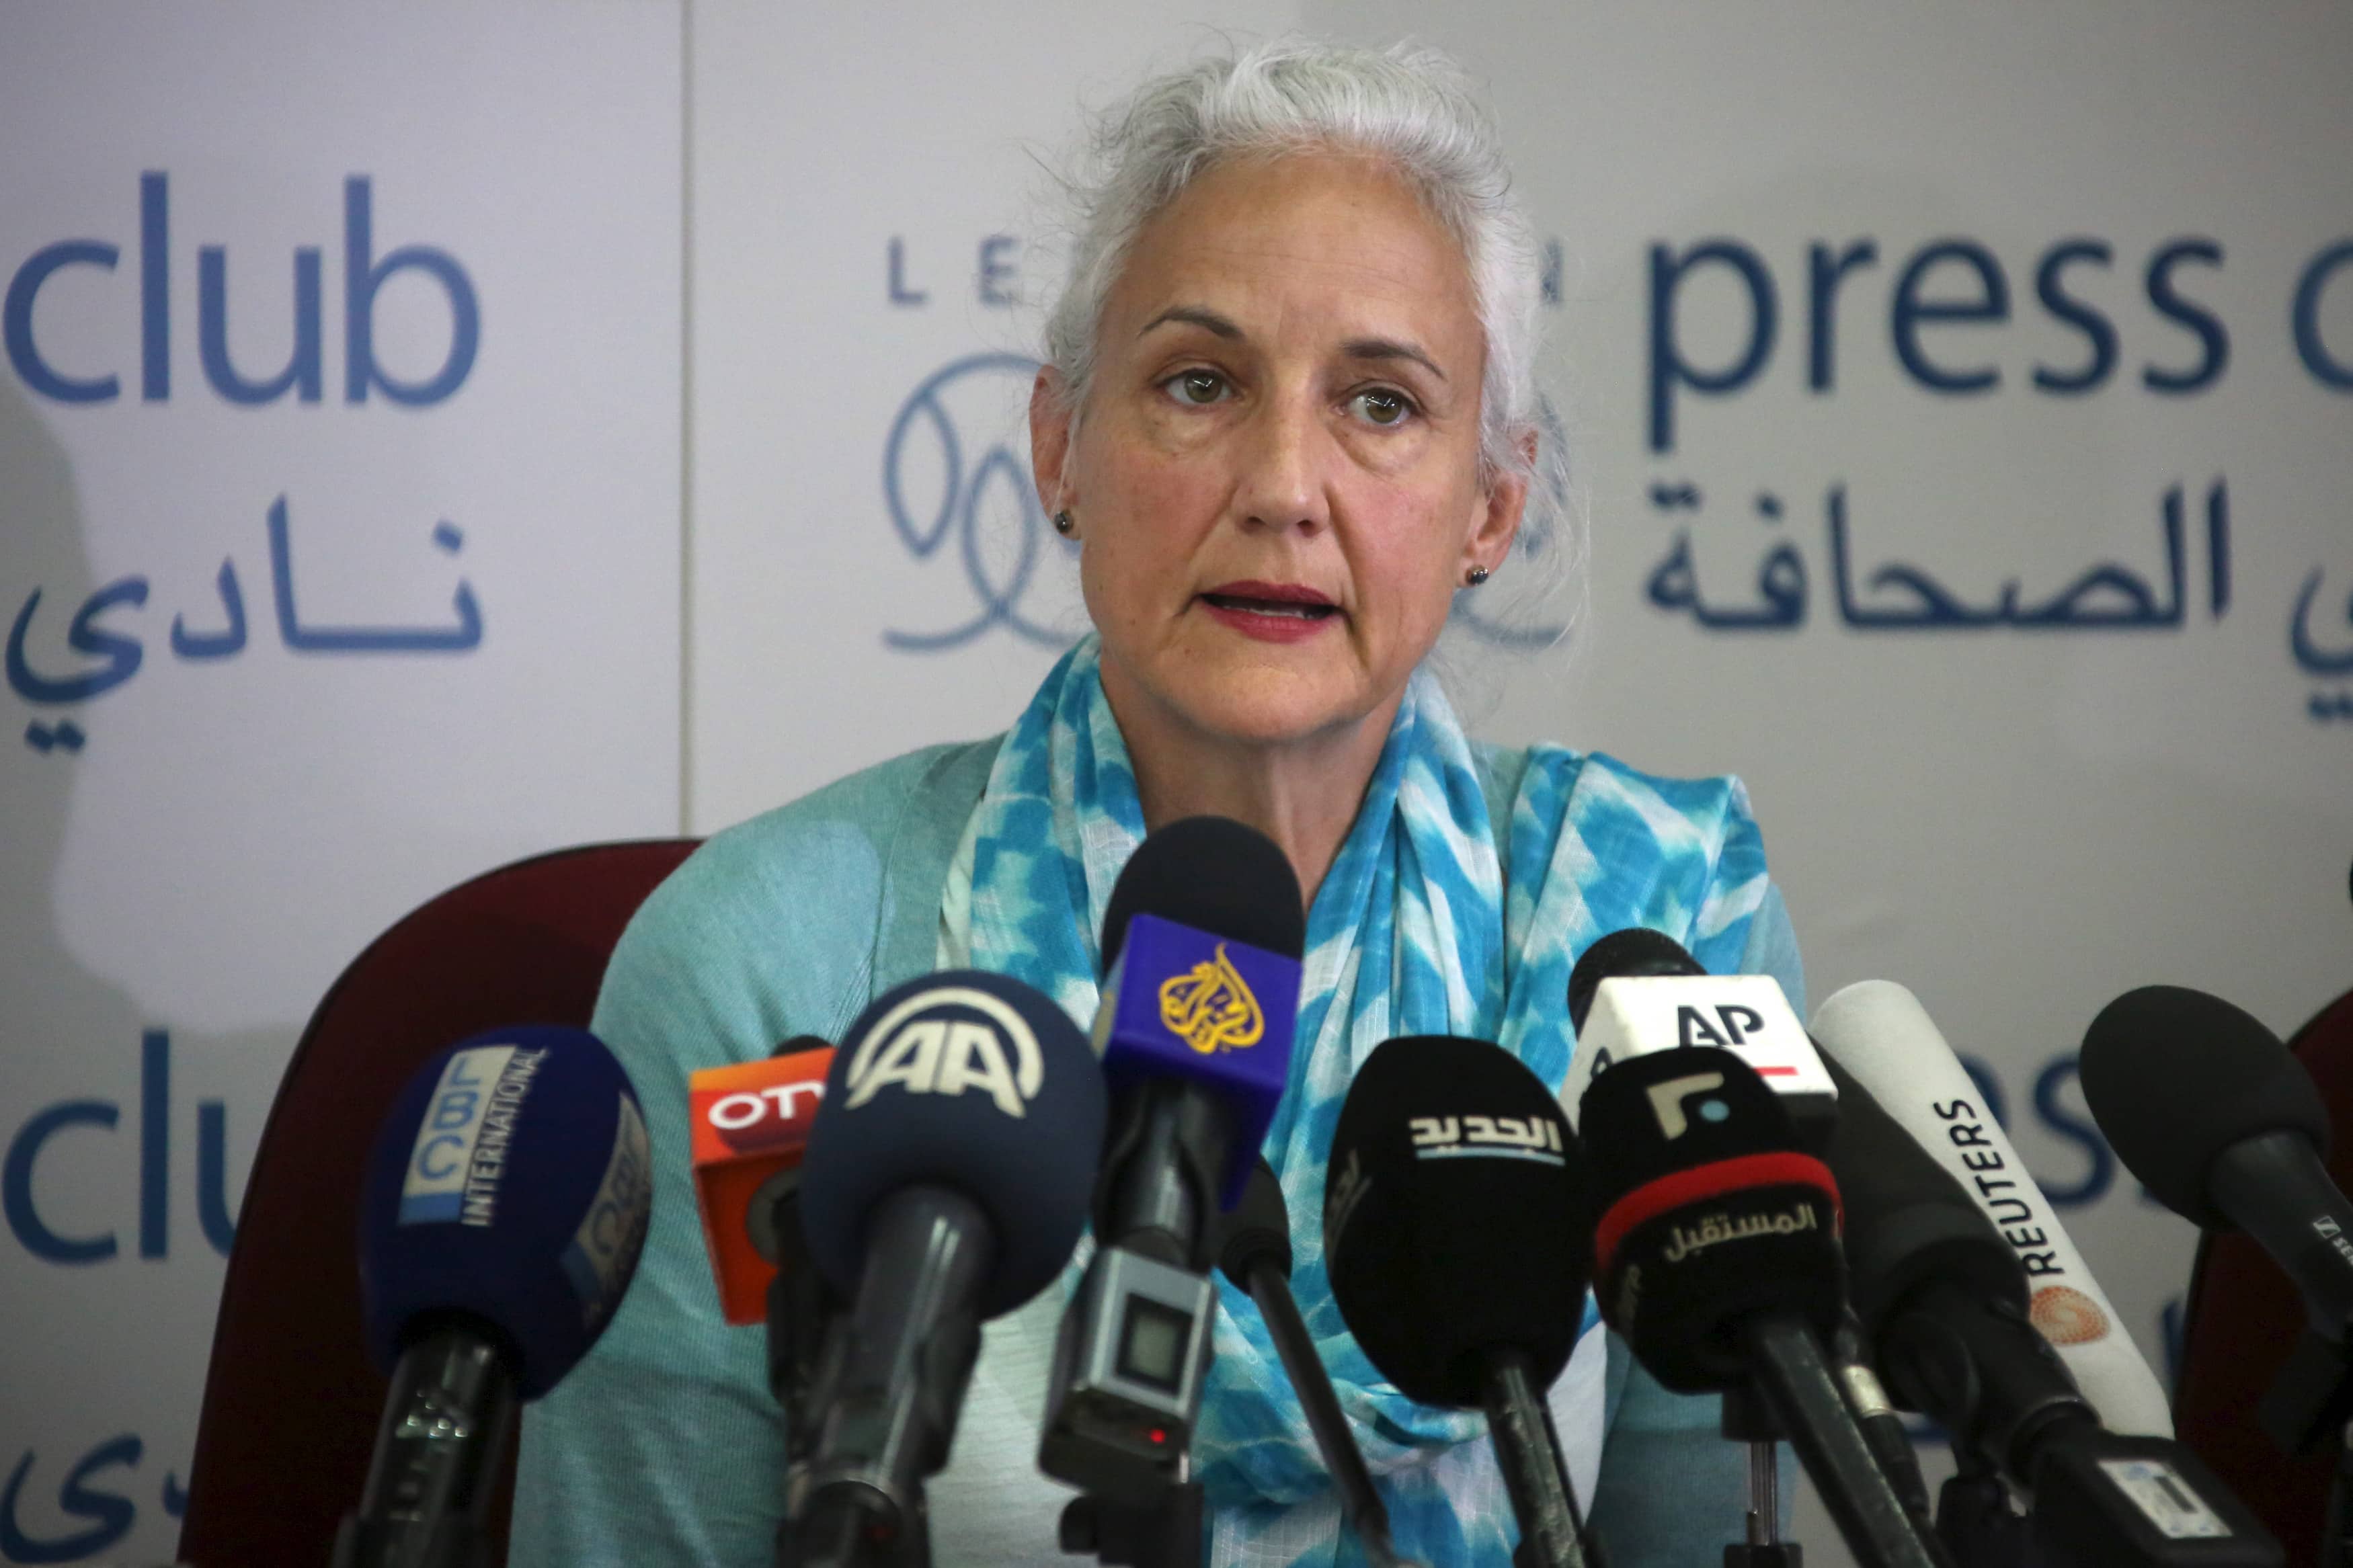 Debra, the mother of American reporter Austin Tice who has been missing in Syria for more than three years, speaks during a news conference at the Press Club in Beirut May 19, 2015, REUTERS/Aziz Taher